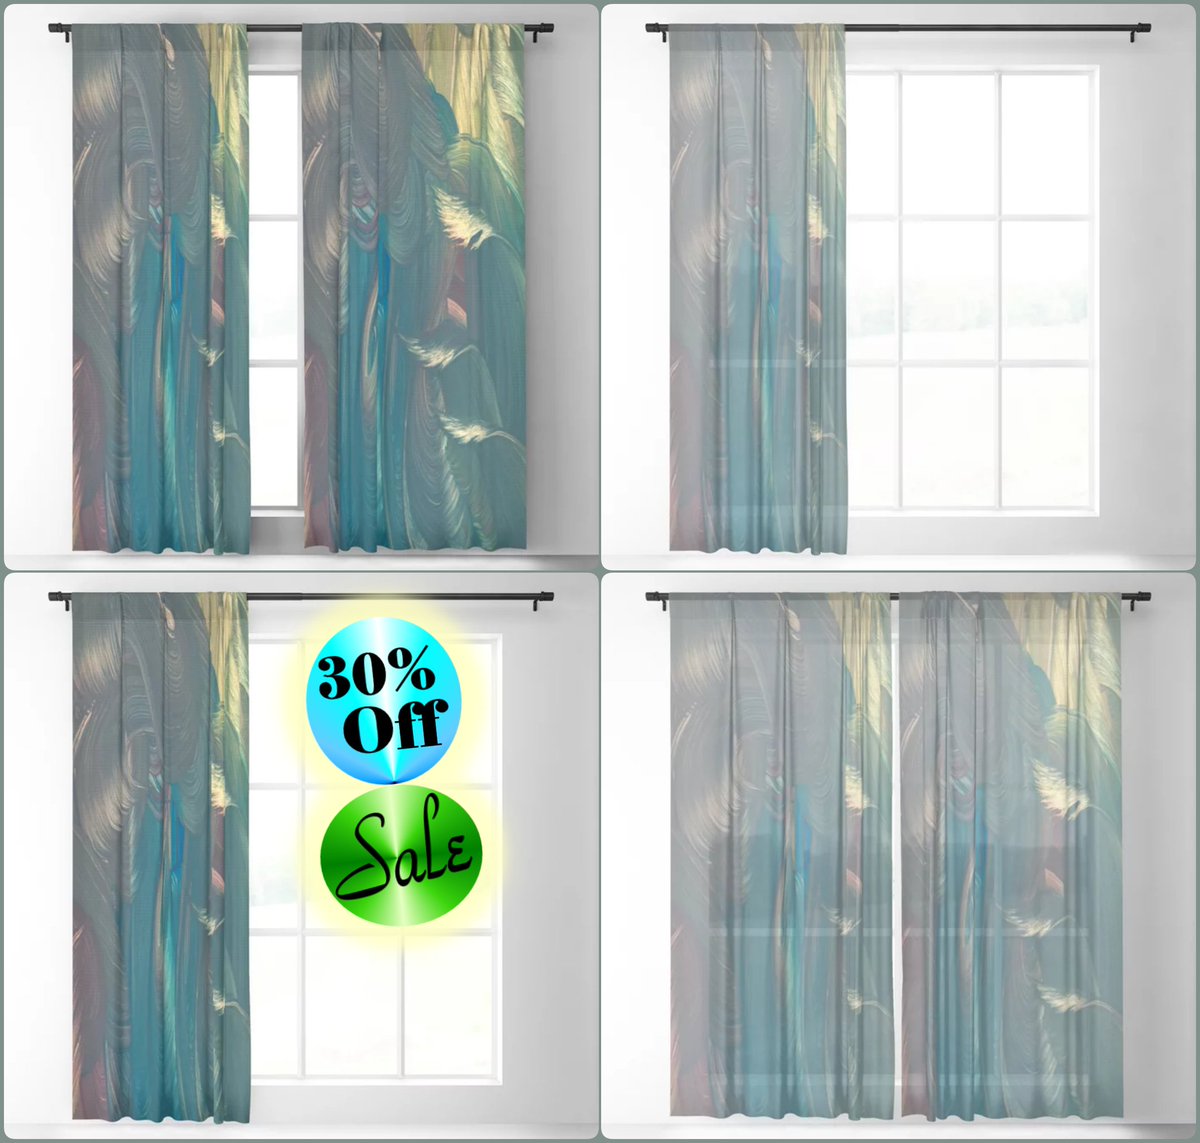 *SALE 30% Off*
Kujata Blackout & Sheer Curtain~by Art Falaxy~
~Exquisite Decor~
#artfalaxy #art #curtains #drapes #homedecor #society6 #swirls #accents #sheercurtains #blackoutcurtains #floorrugs

society6.com/product/kujata…
society6.com/product/kujata…